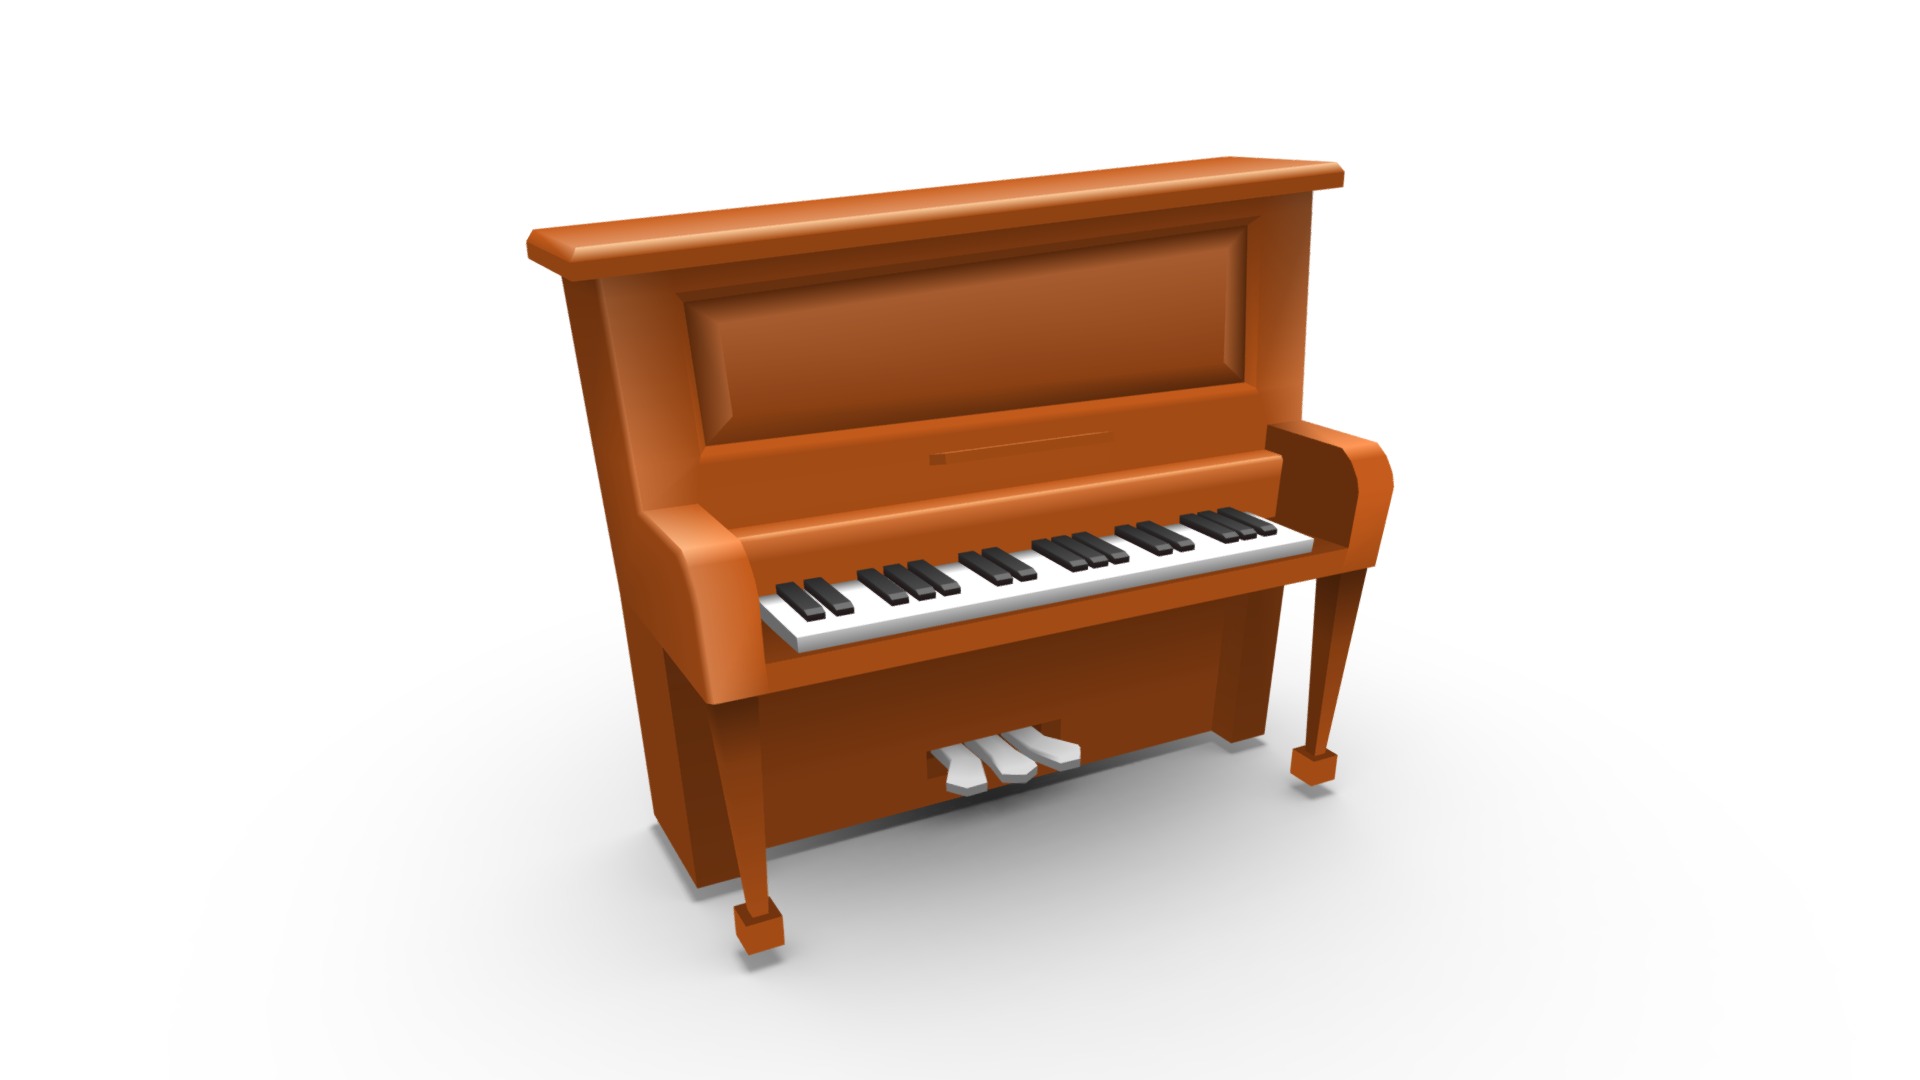 3D model vert Coloured Piano - This is a 3D model of the vert Coloured Piano. The 3D model is about a wooden chair with a keyboard.